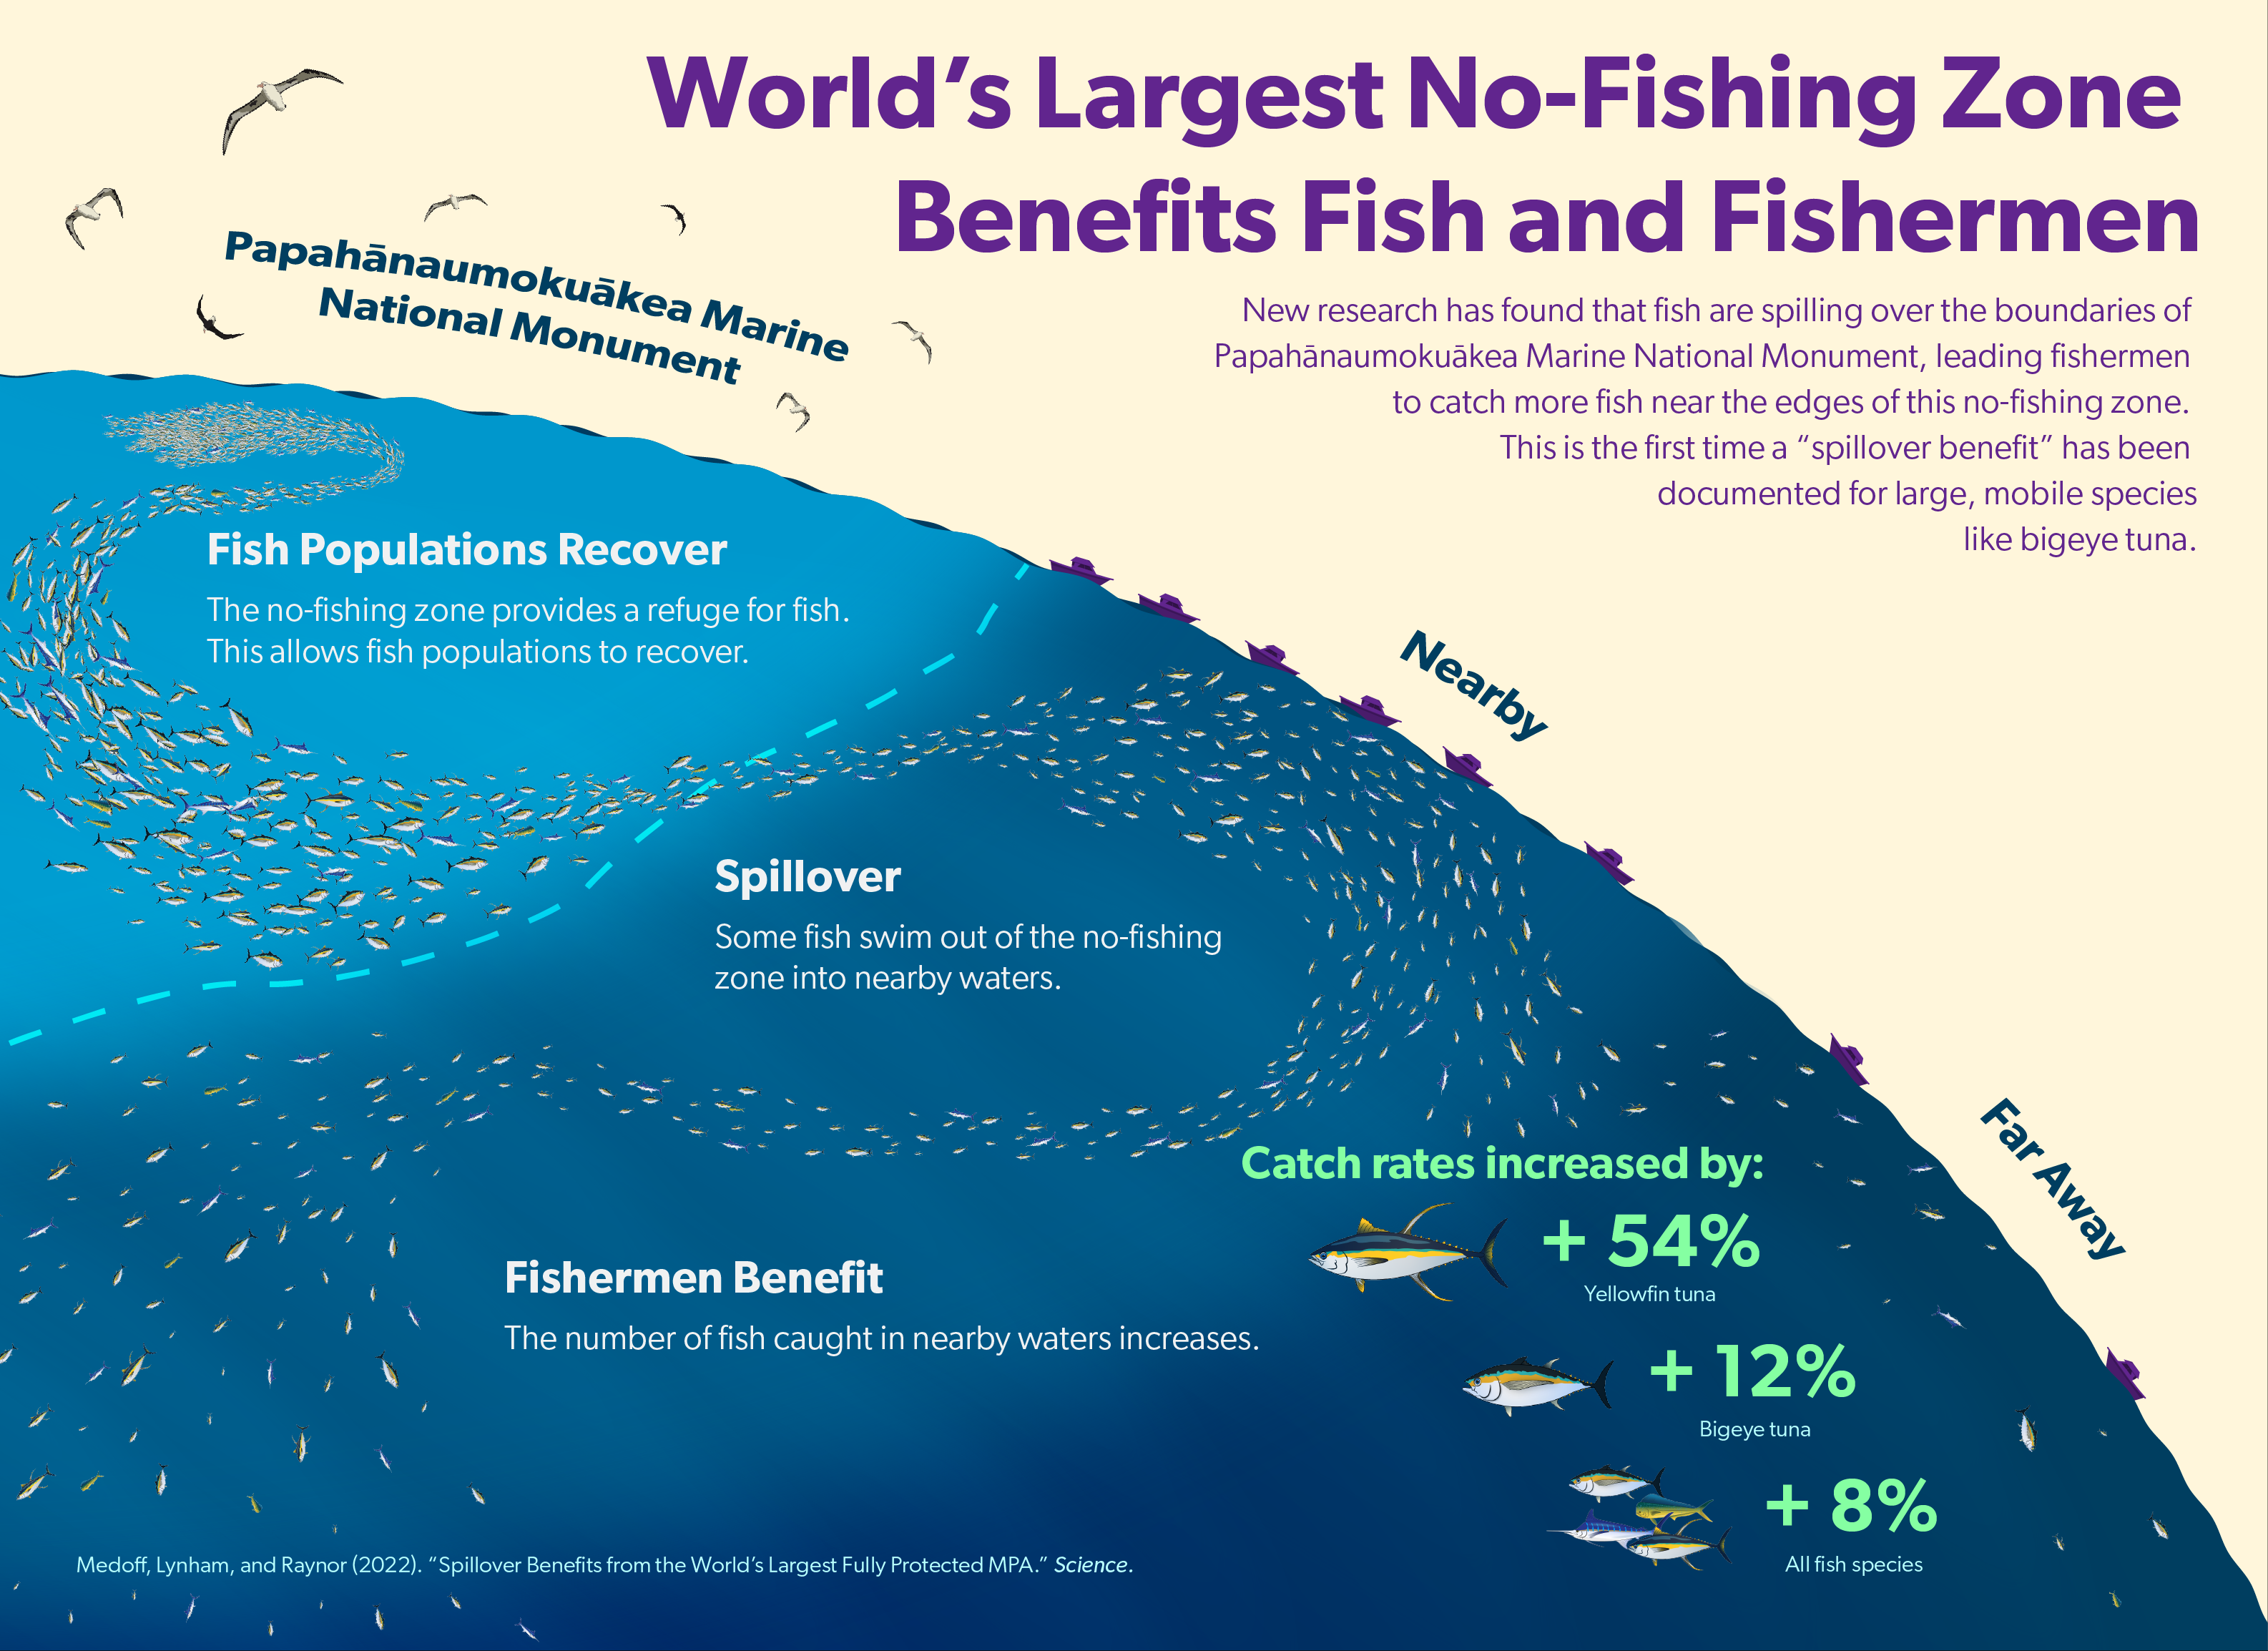 Too many fish and not enough time - Conservation Federation of